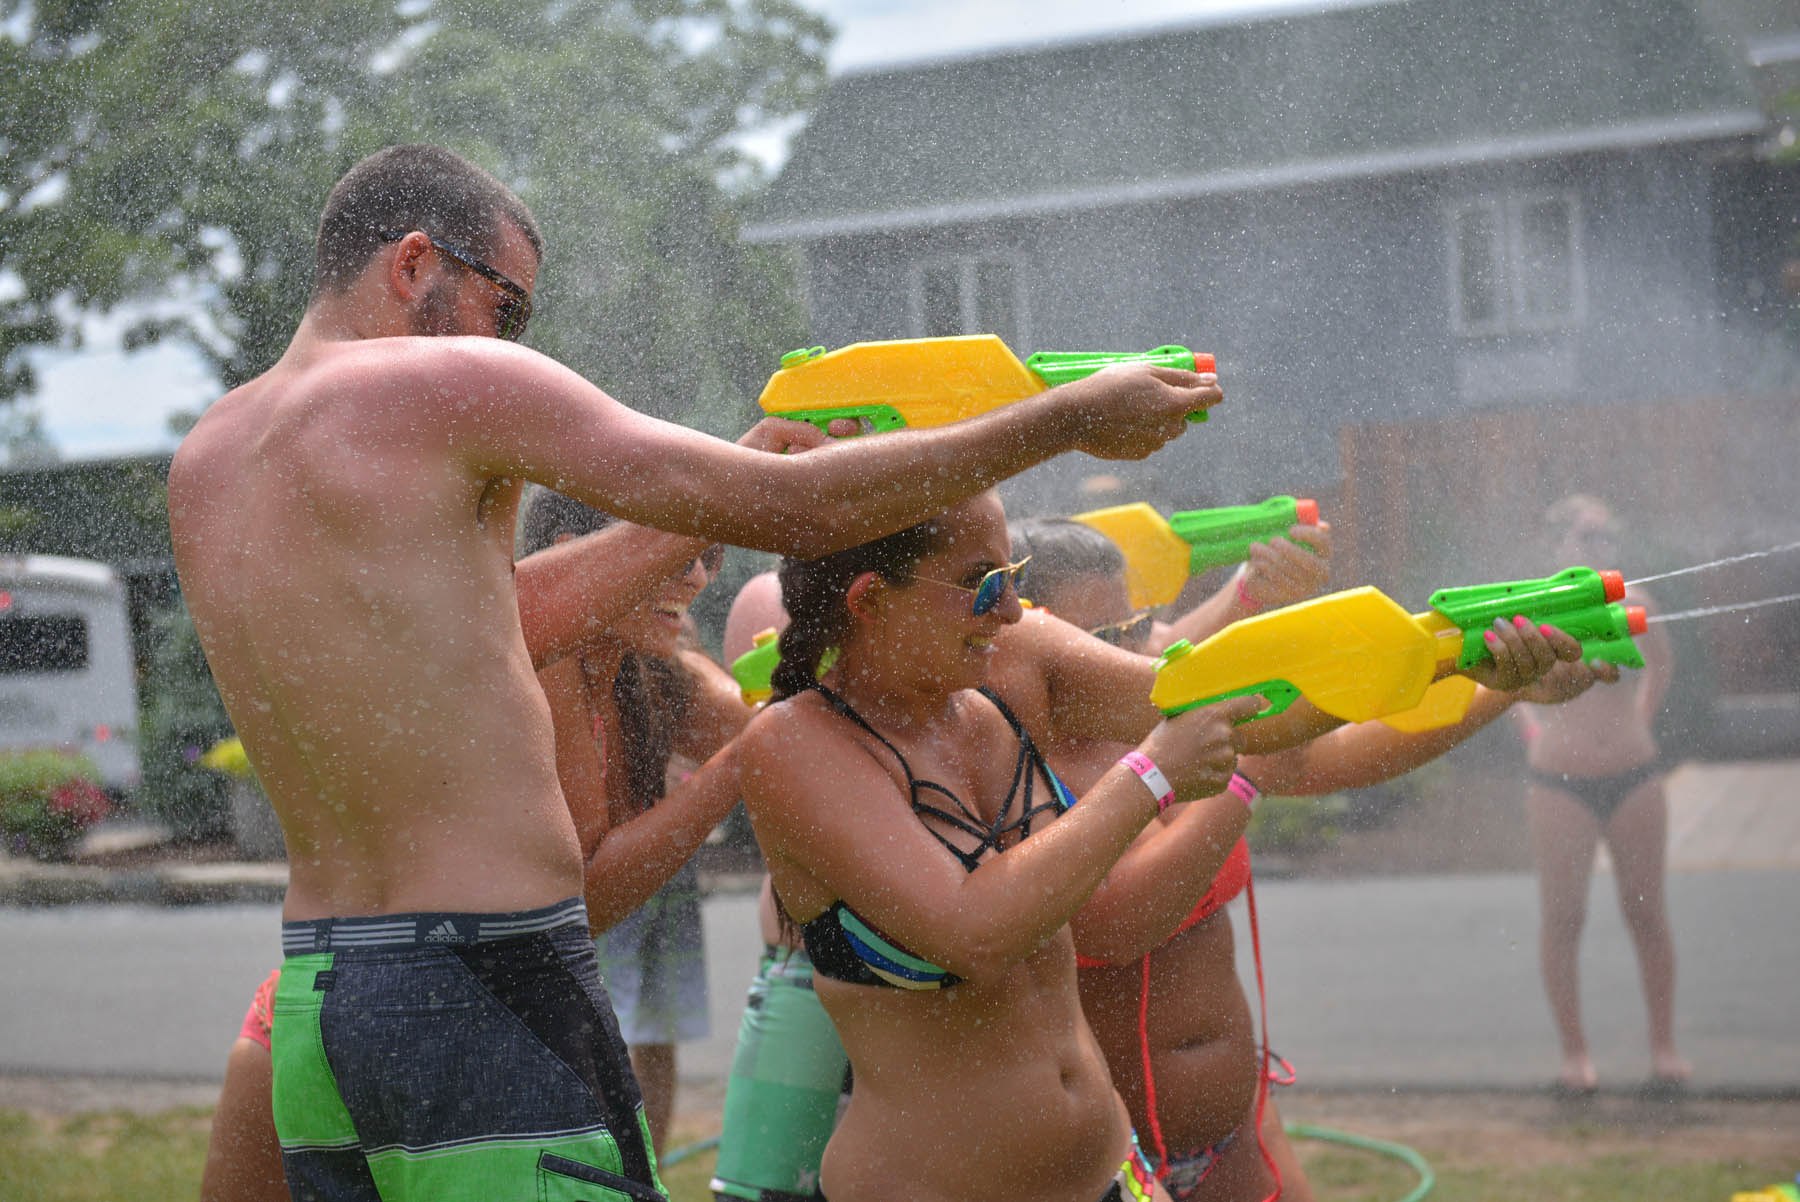 Group with squirt guns.